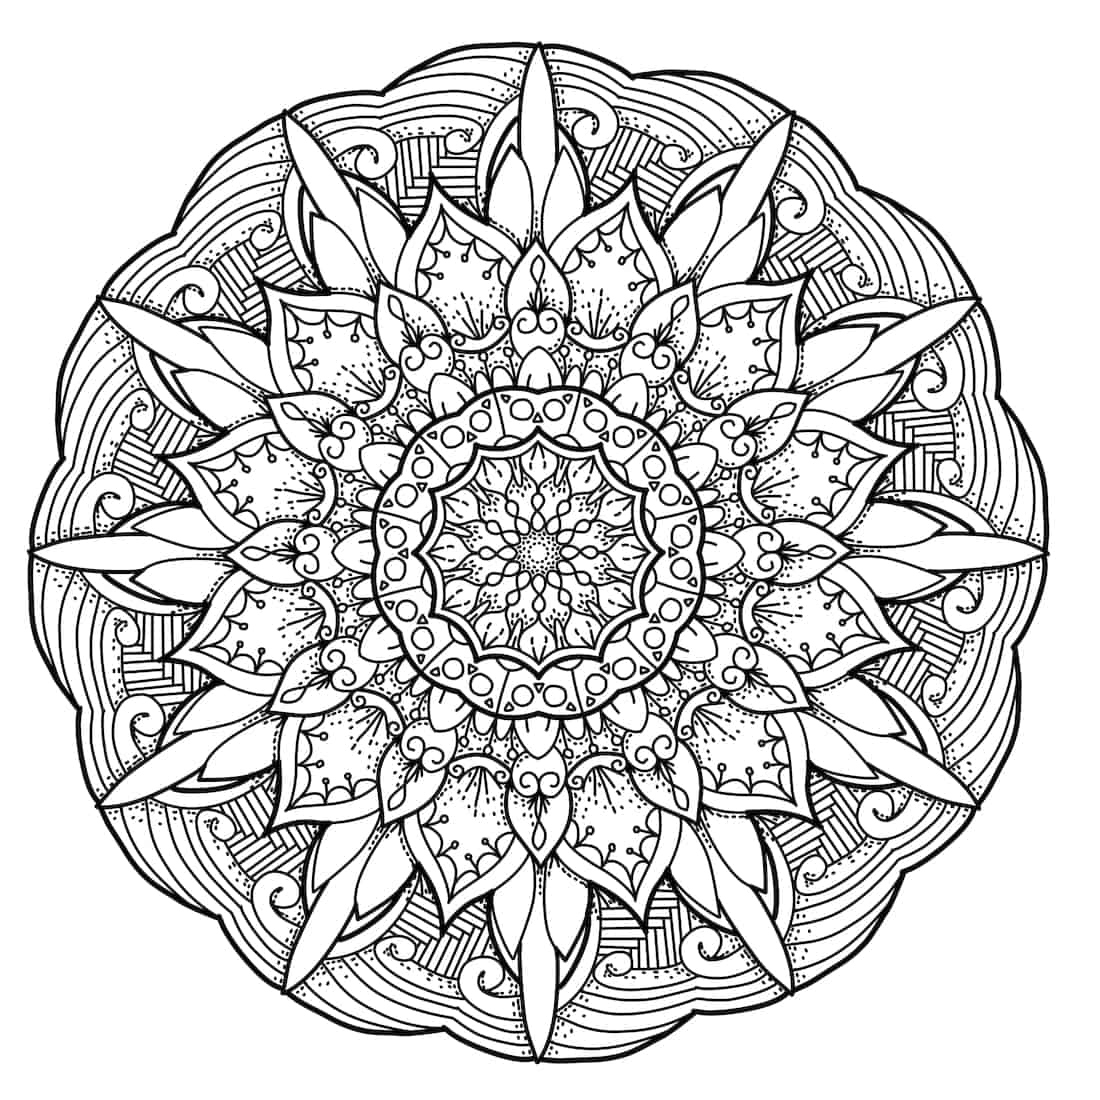 Free Coloring Pages For You To Print - Monday Mandala inside Free Mandalas To Colour In Printable